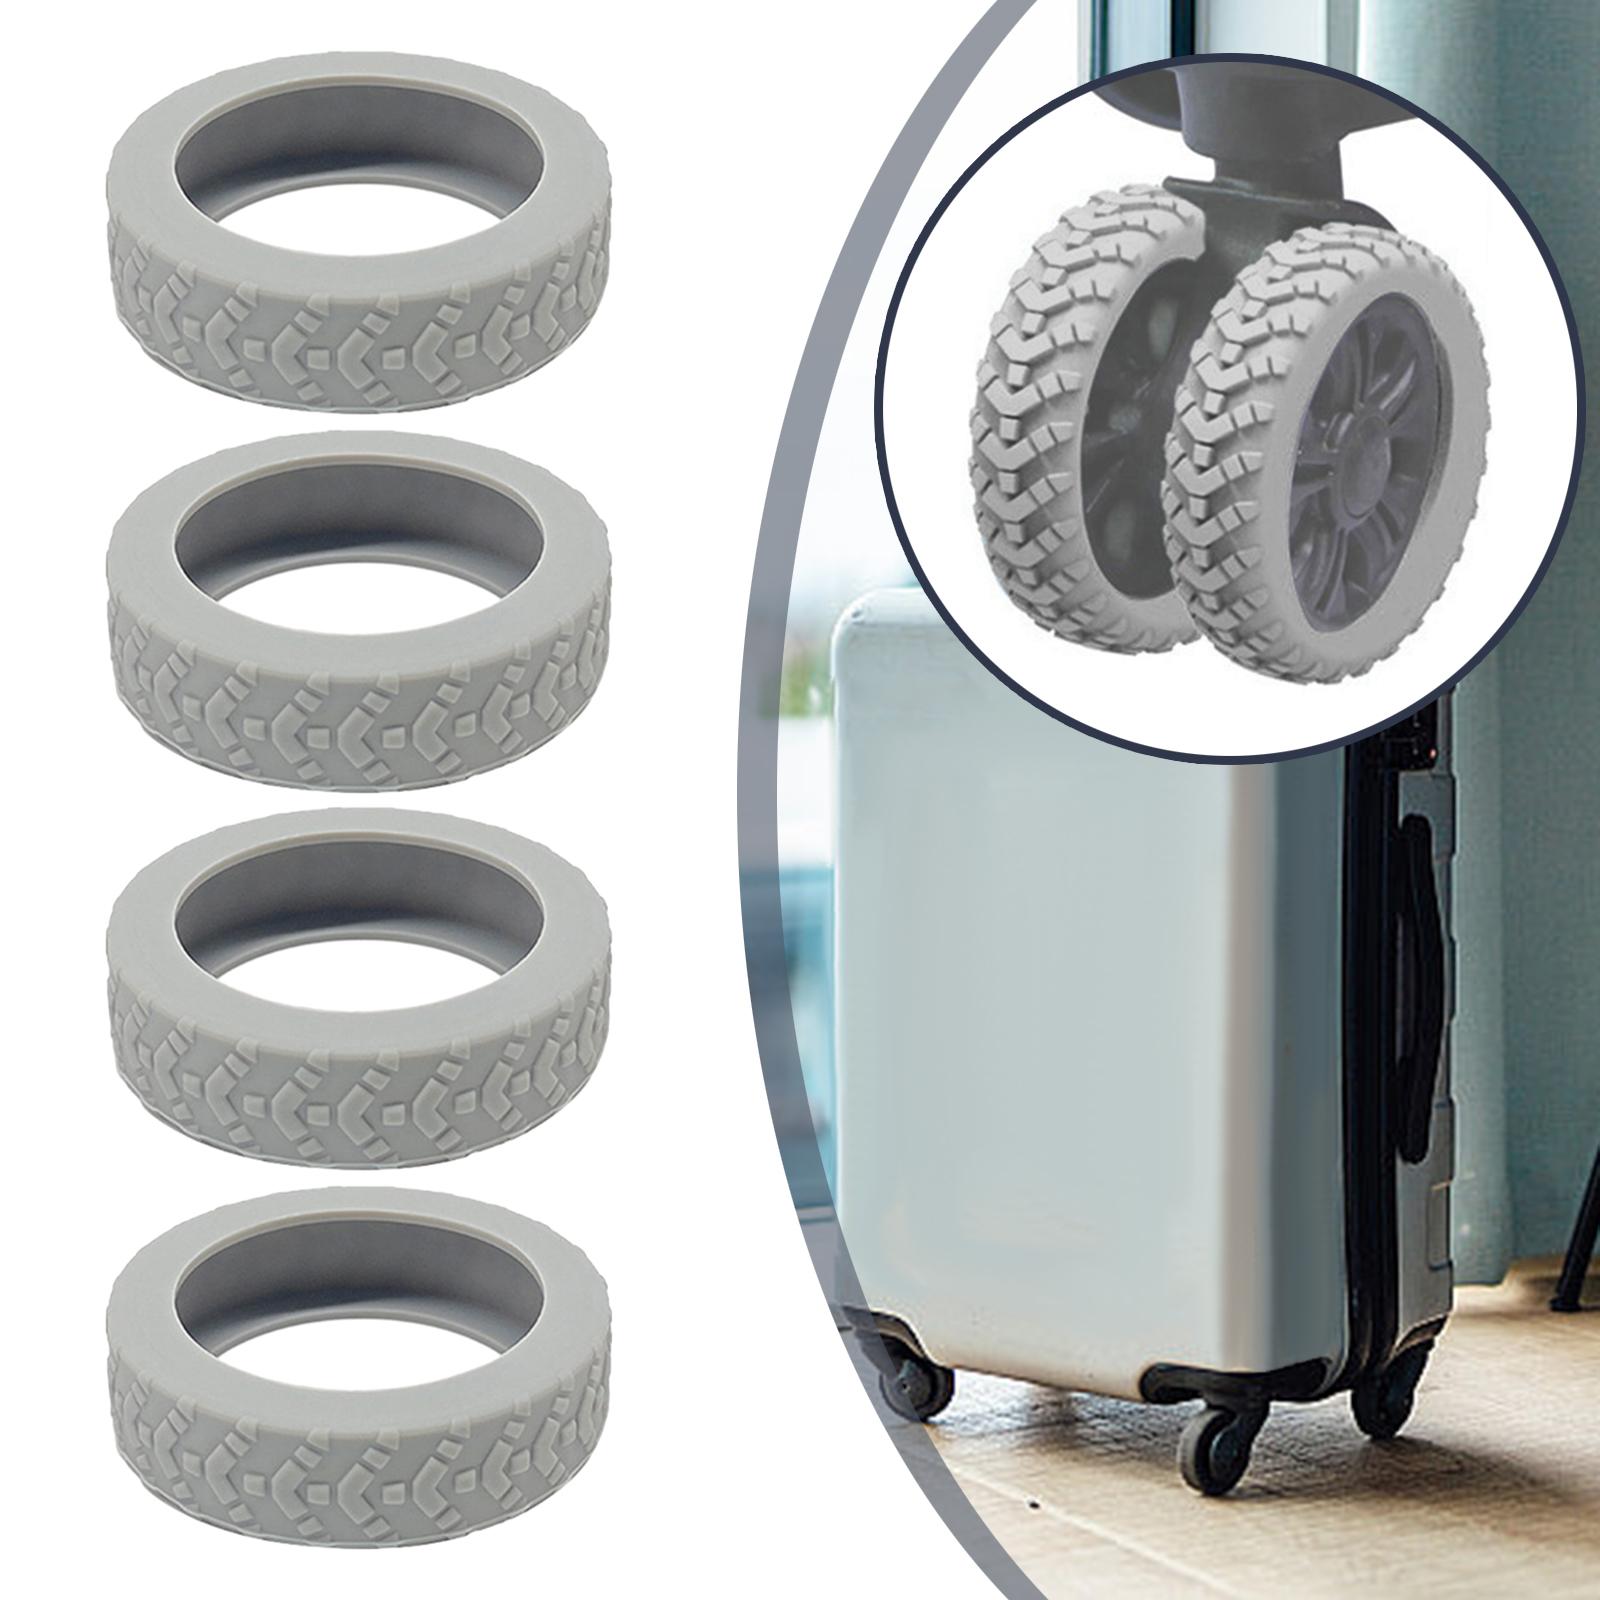 4 Pieces Luggage Wheels Covers Replace Parts Silicone Suitcase Wheels Covers Gray